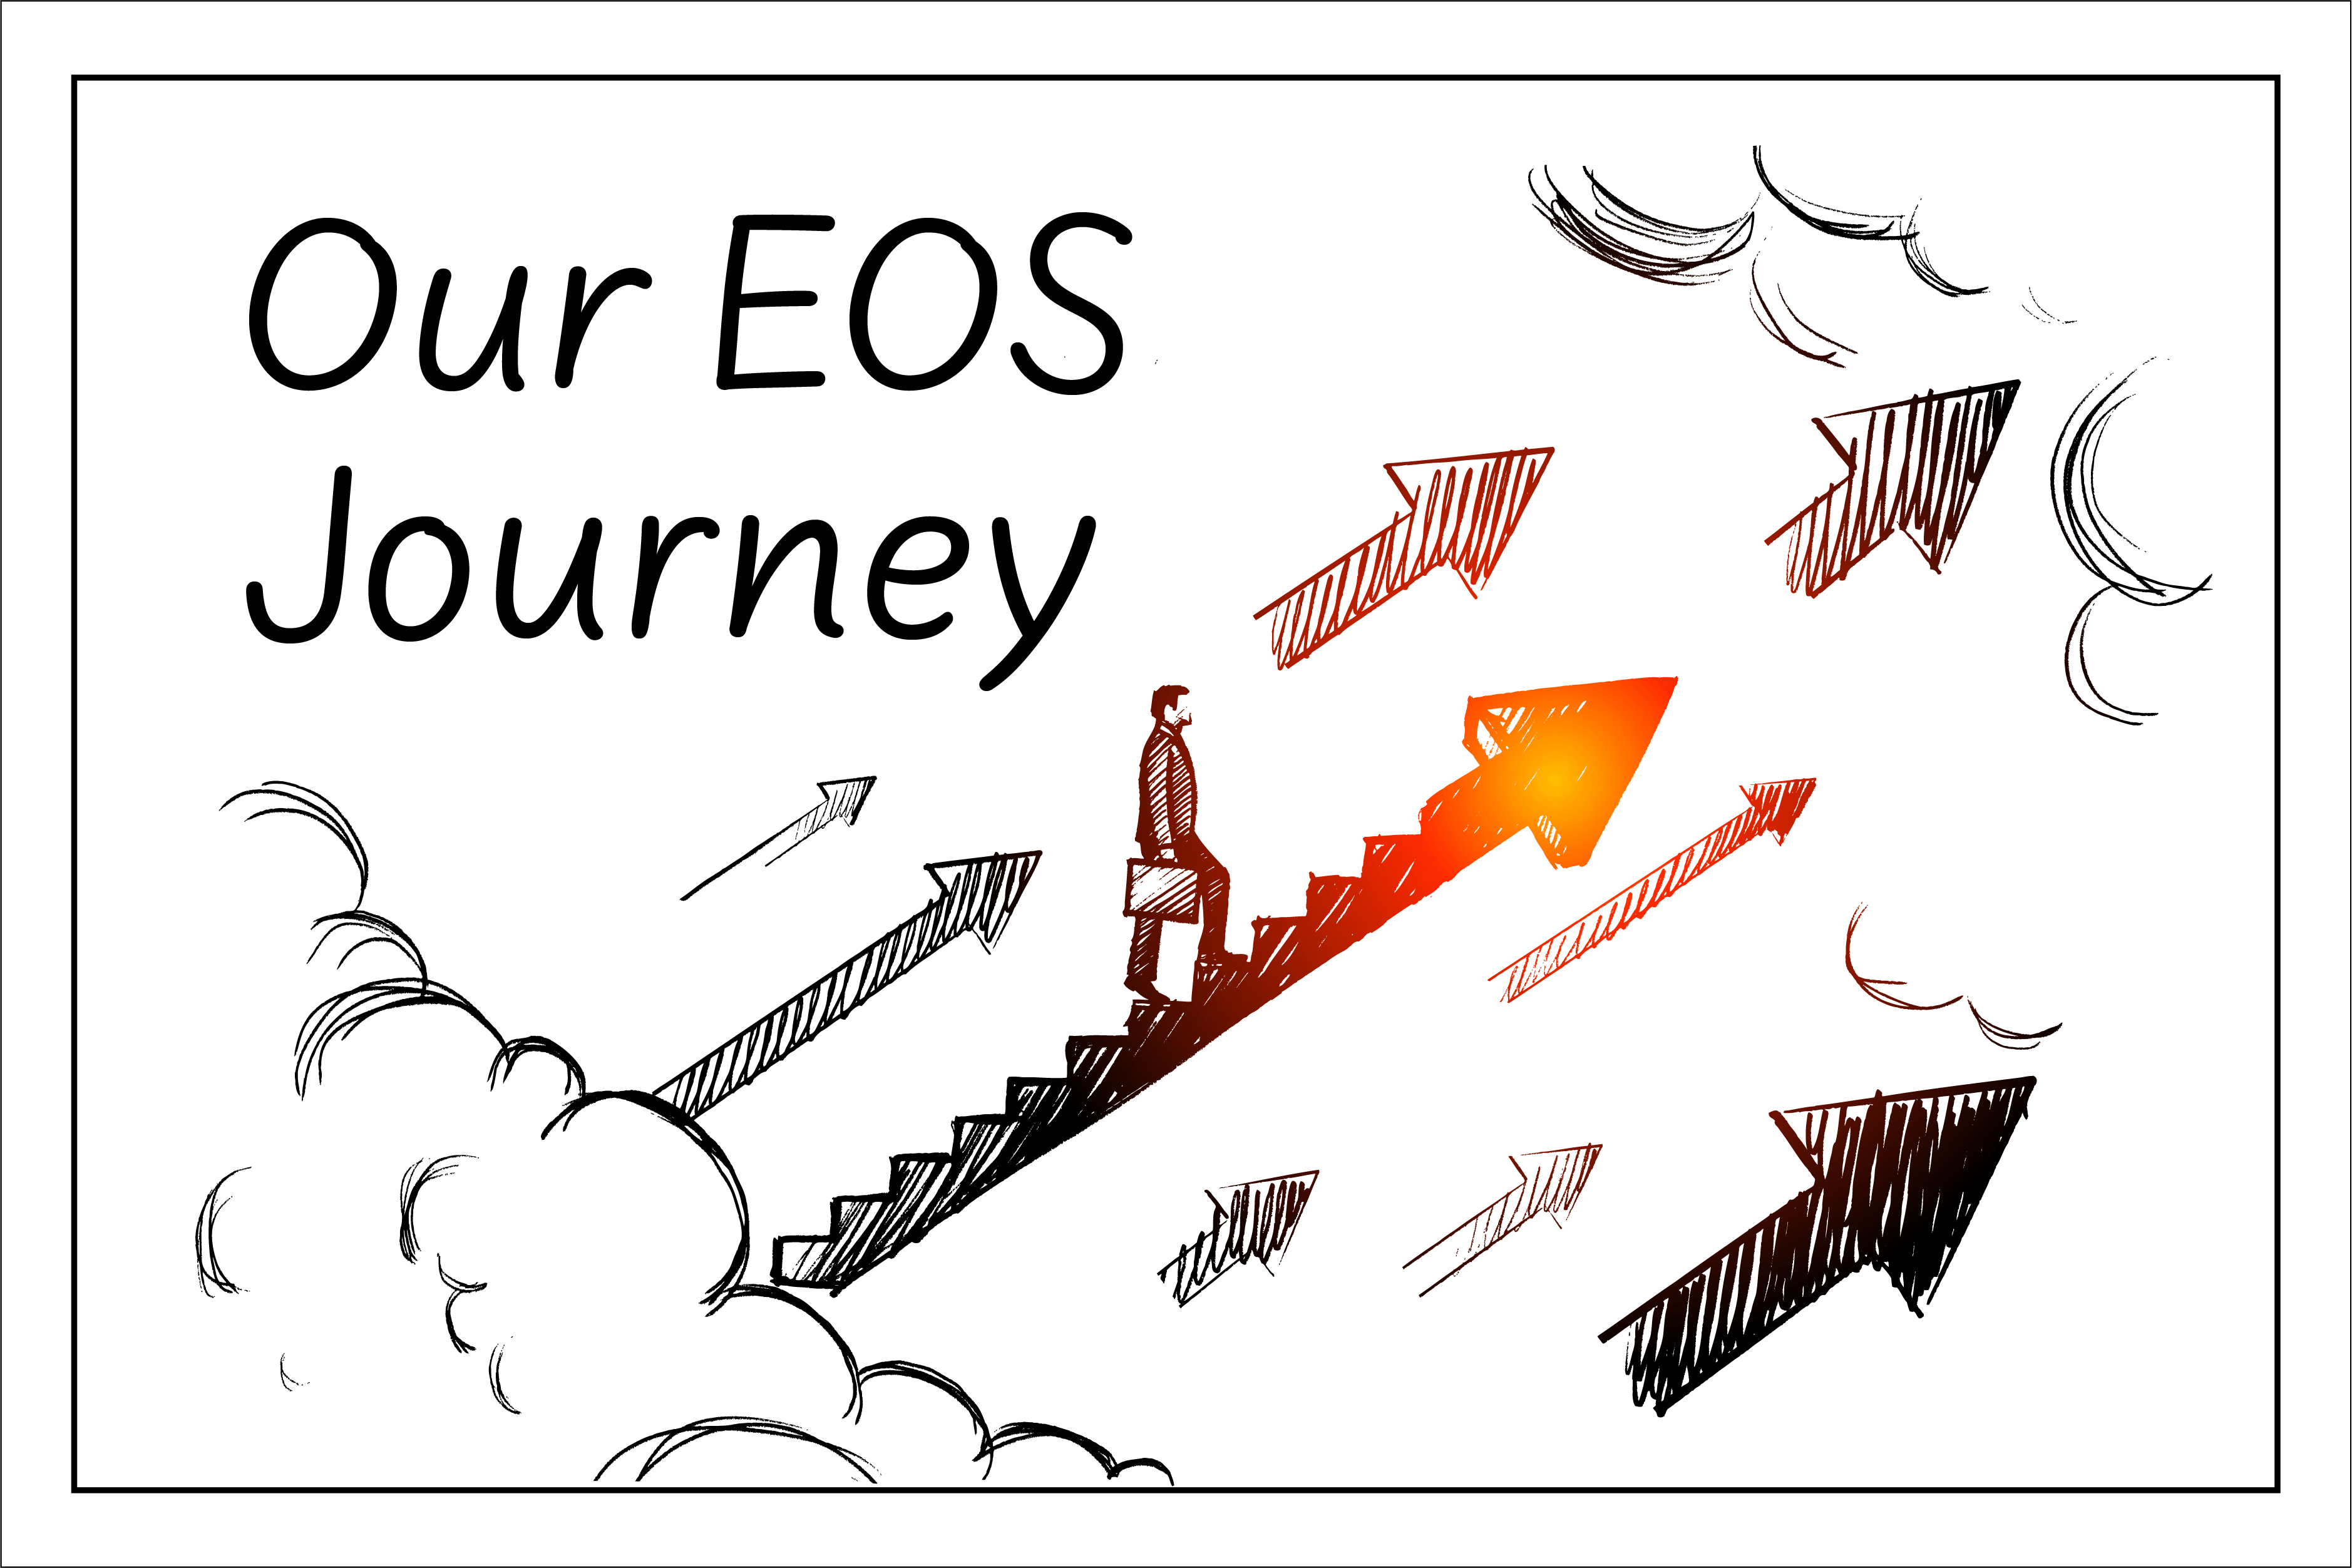 Our EOS Journey